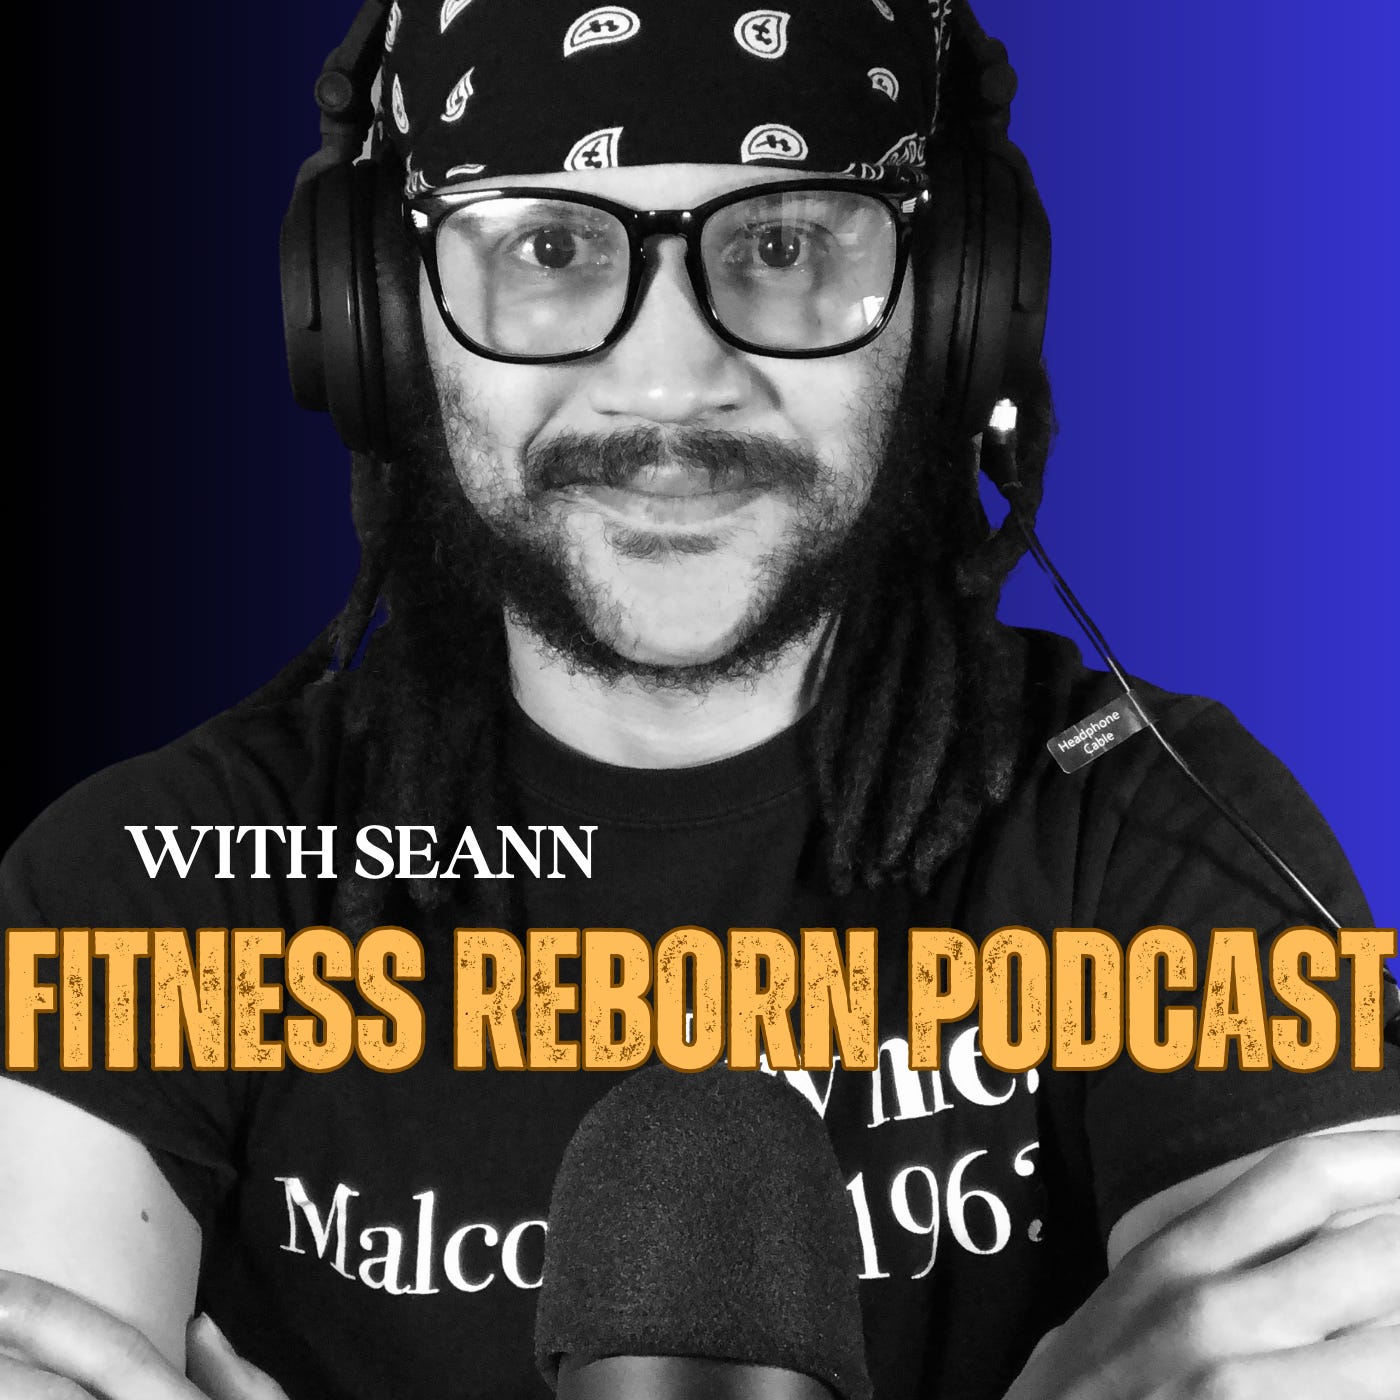 Fitness Reborn with Seann, E94: Reclaiming Our Vitality with Adrienne Simmons